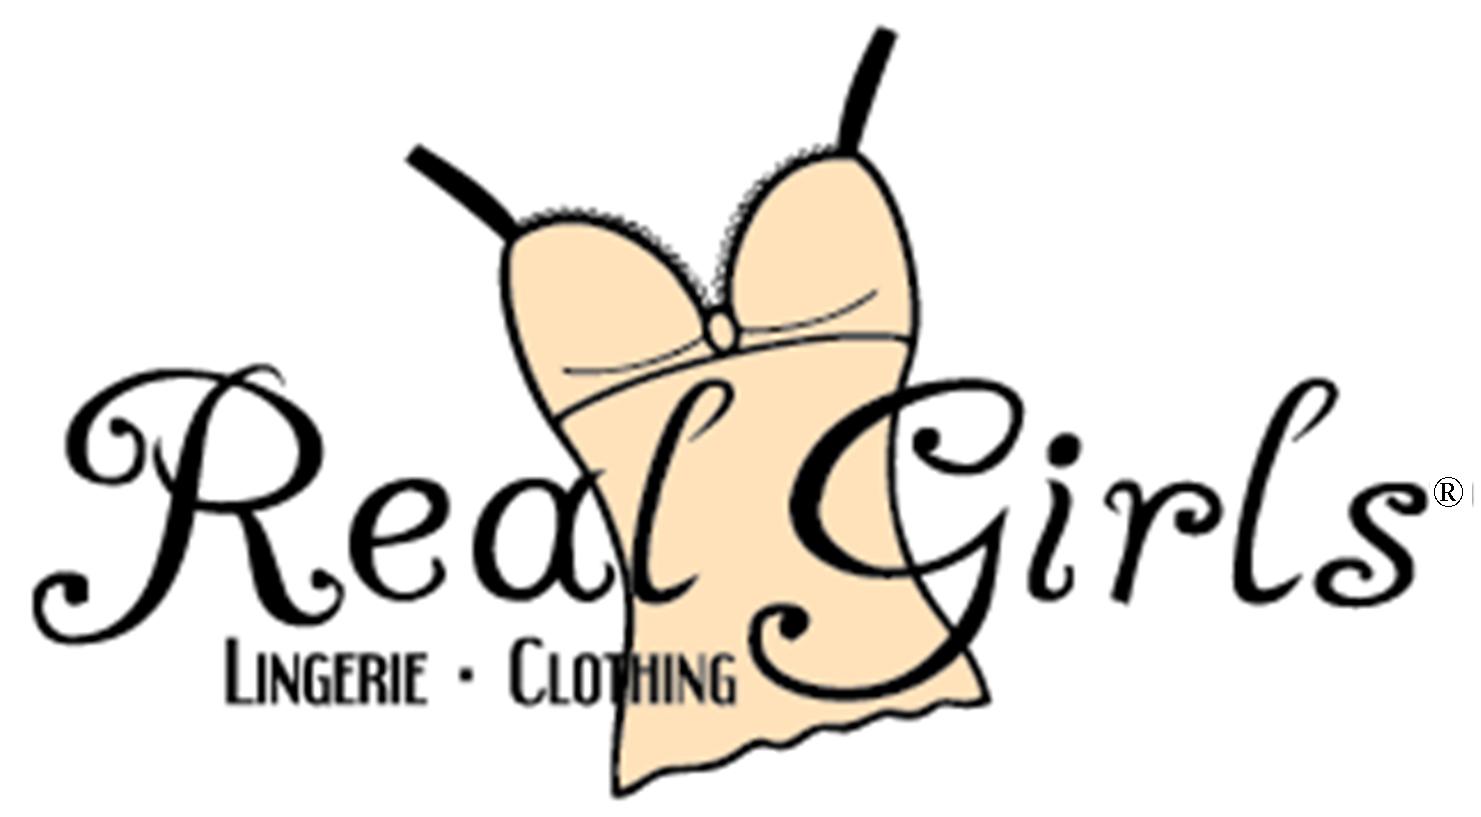 Real Girls Is The Perfect Choice For Valentines Day